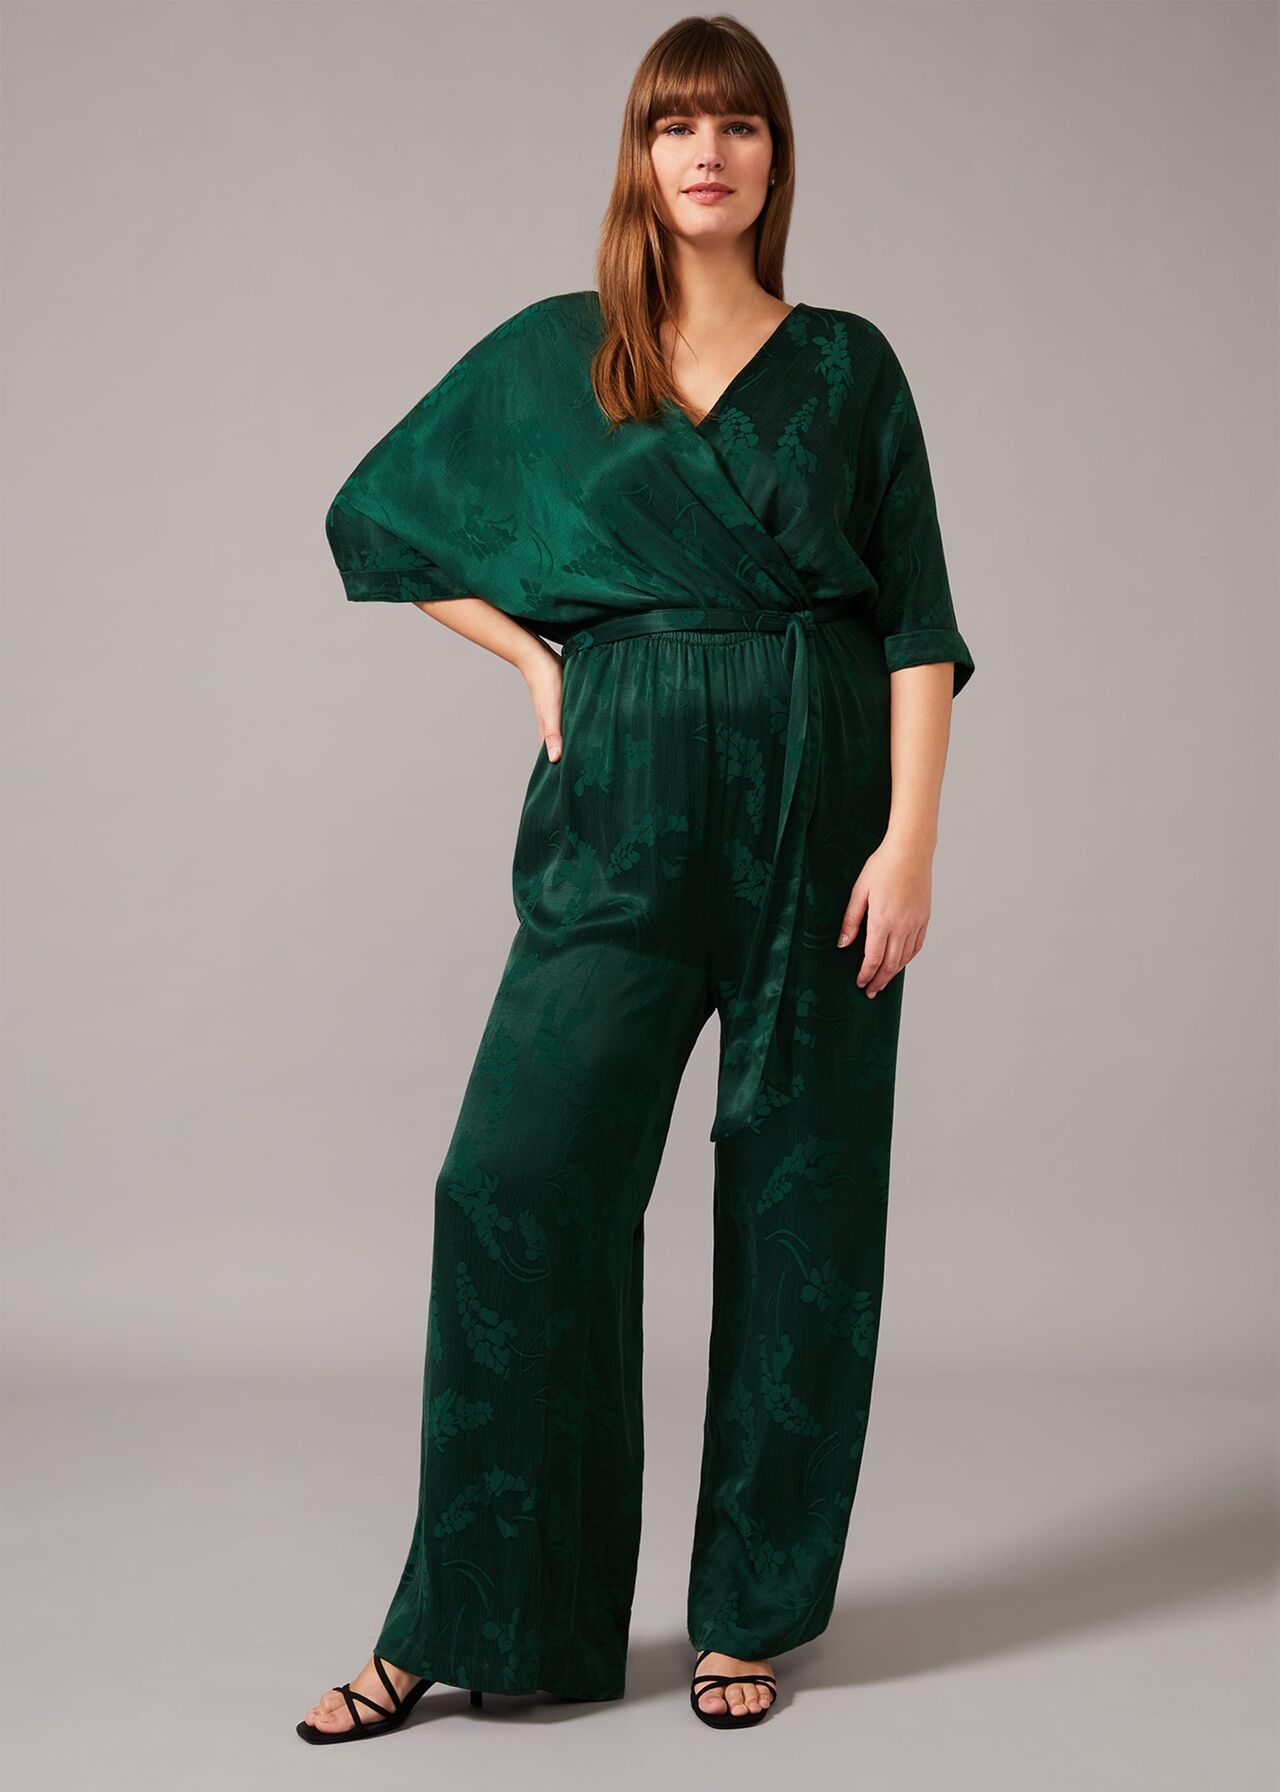 phase 8 green jumpsuit